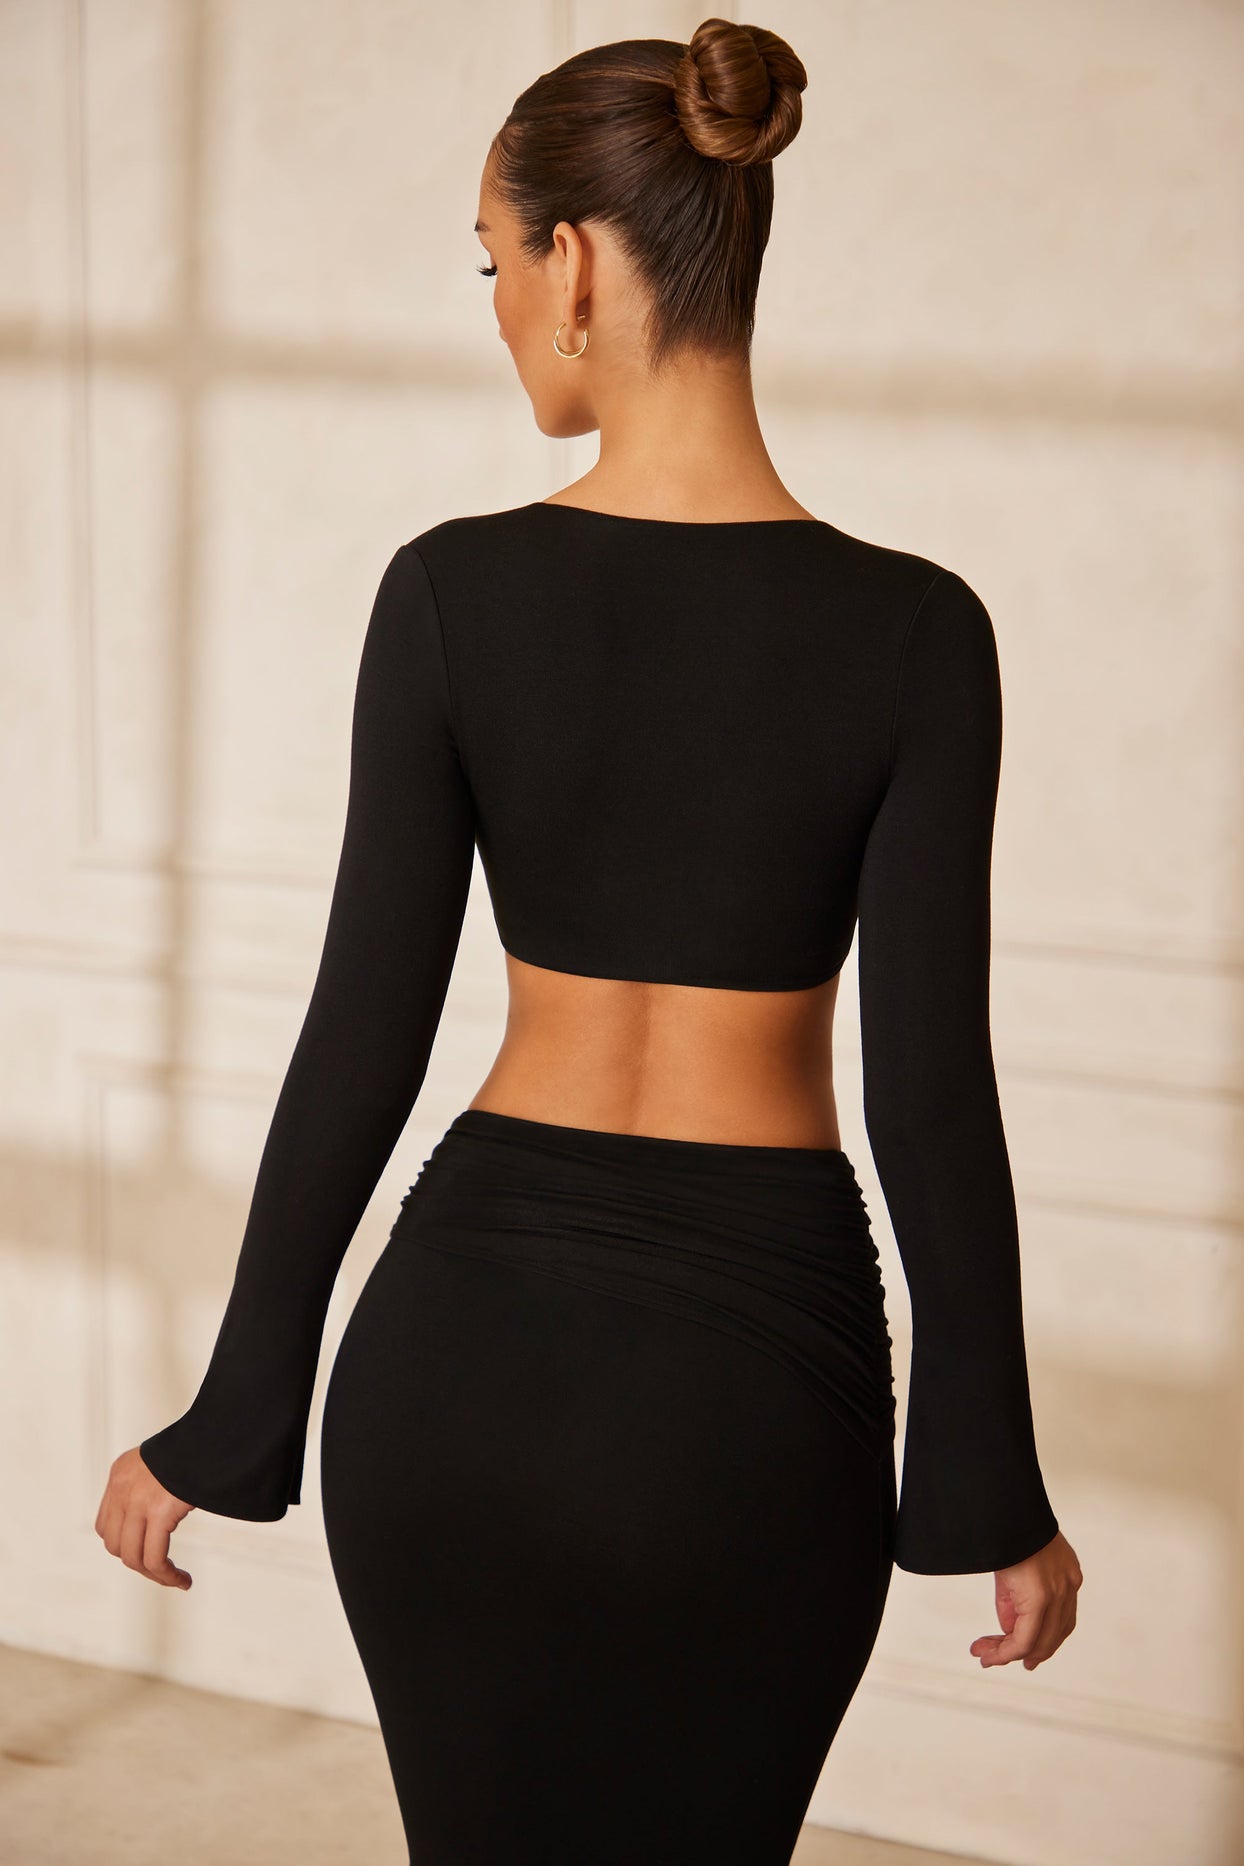 Pursue Fitness Black Long Sleeve Cropped Gym Top L 12 ❤️